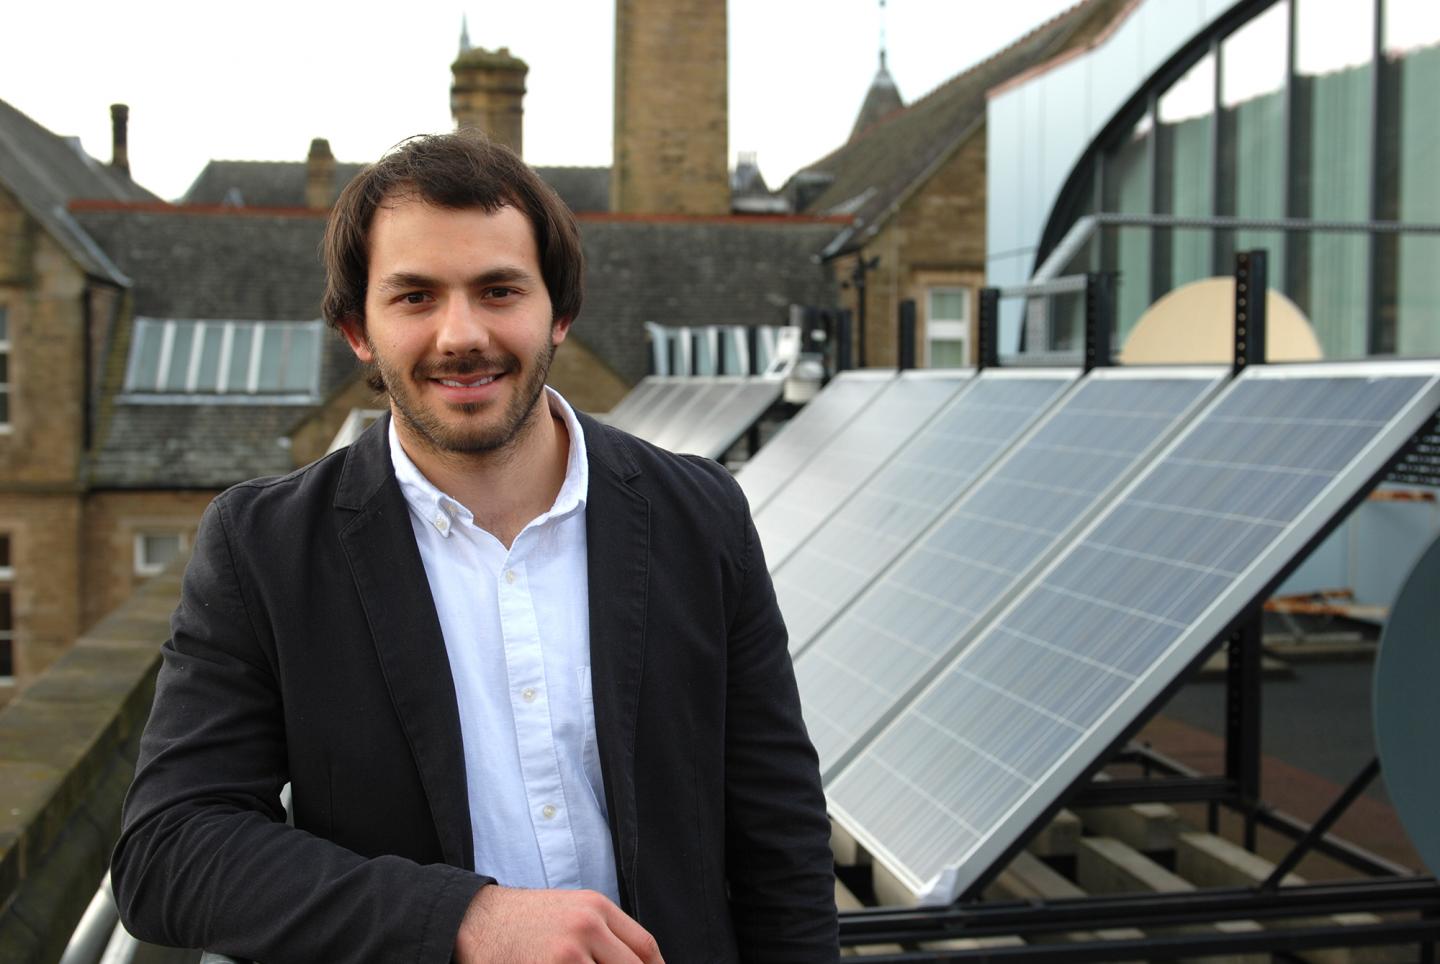 Solar Power -- Largest Study to Date Discovers 25 Percent Power Loss across UK (1 of 3)